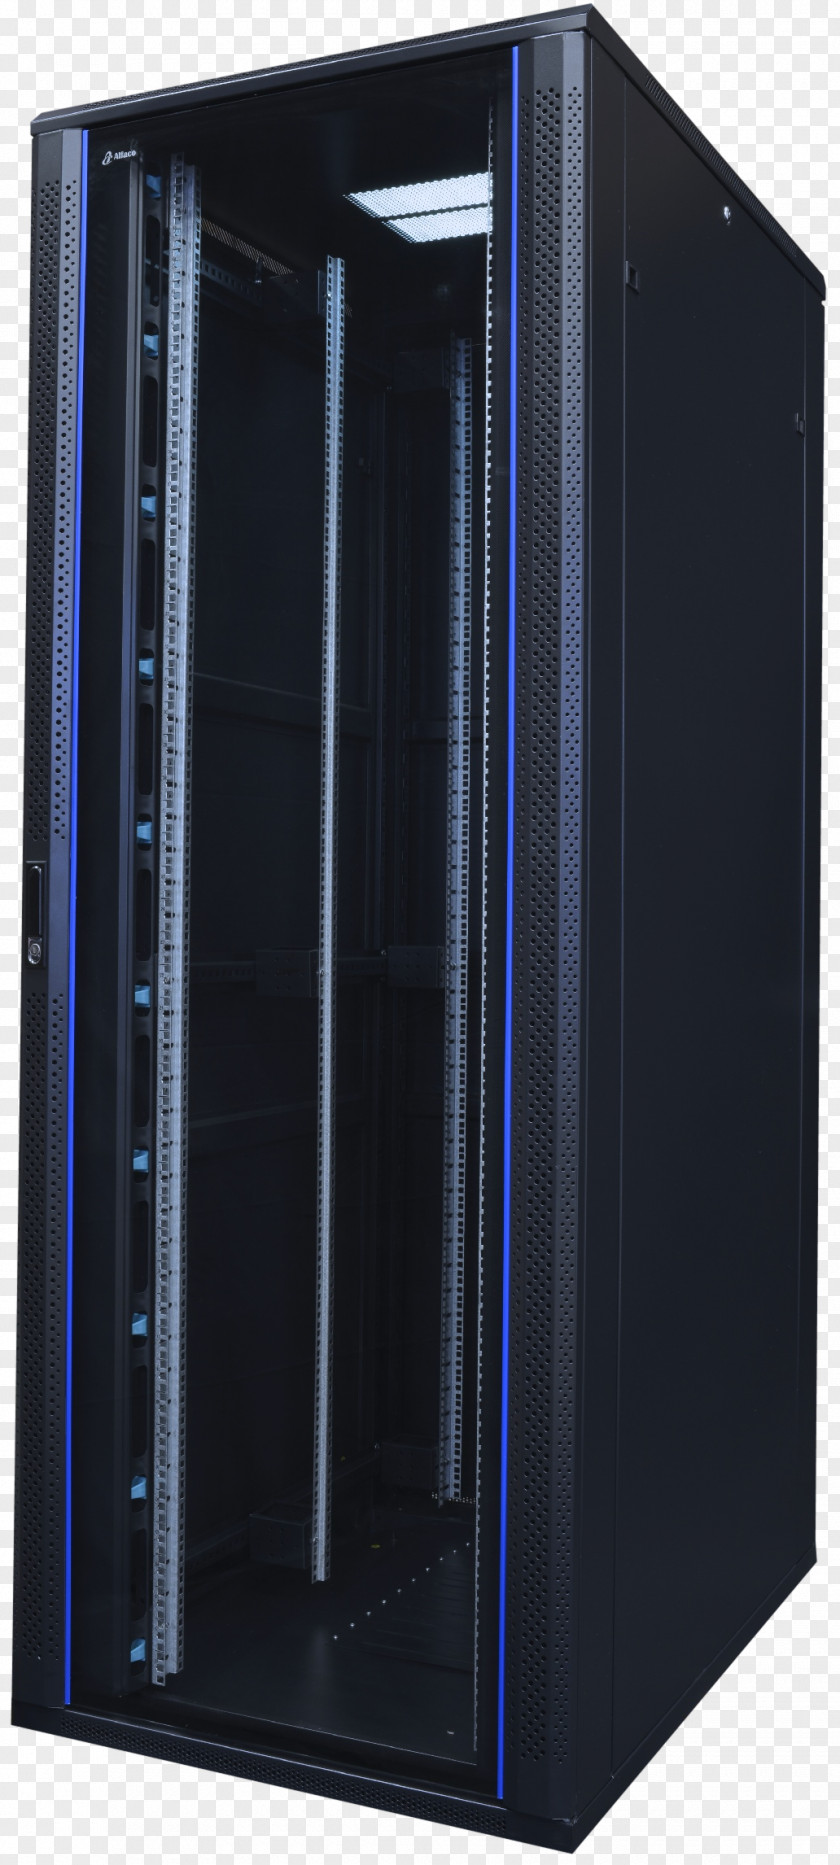 19-inch Rack Computer Cases & Housings Servers Patchkast.com PNG